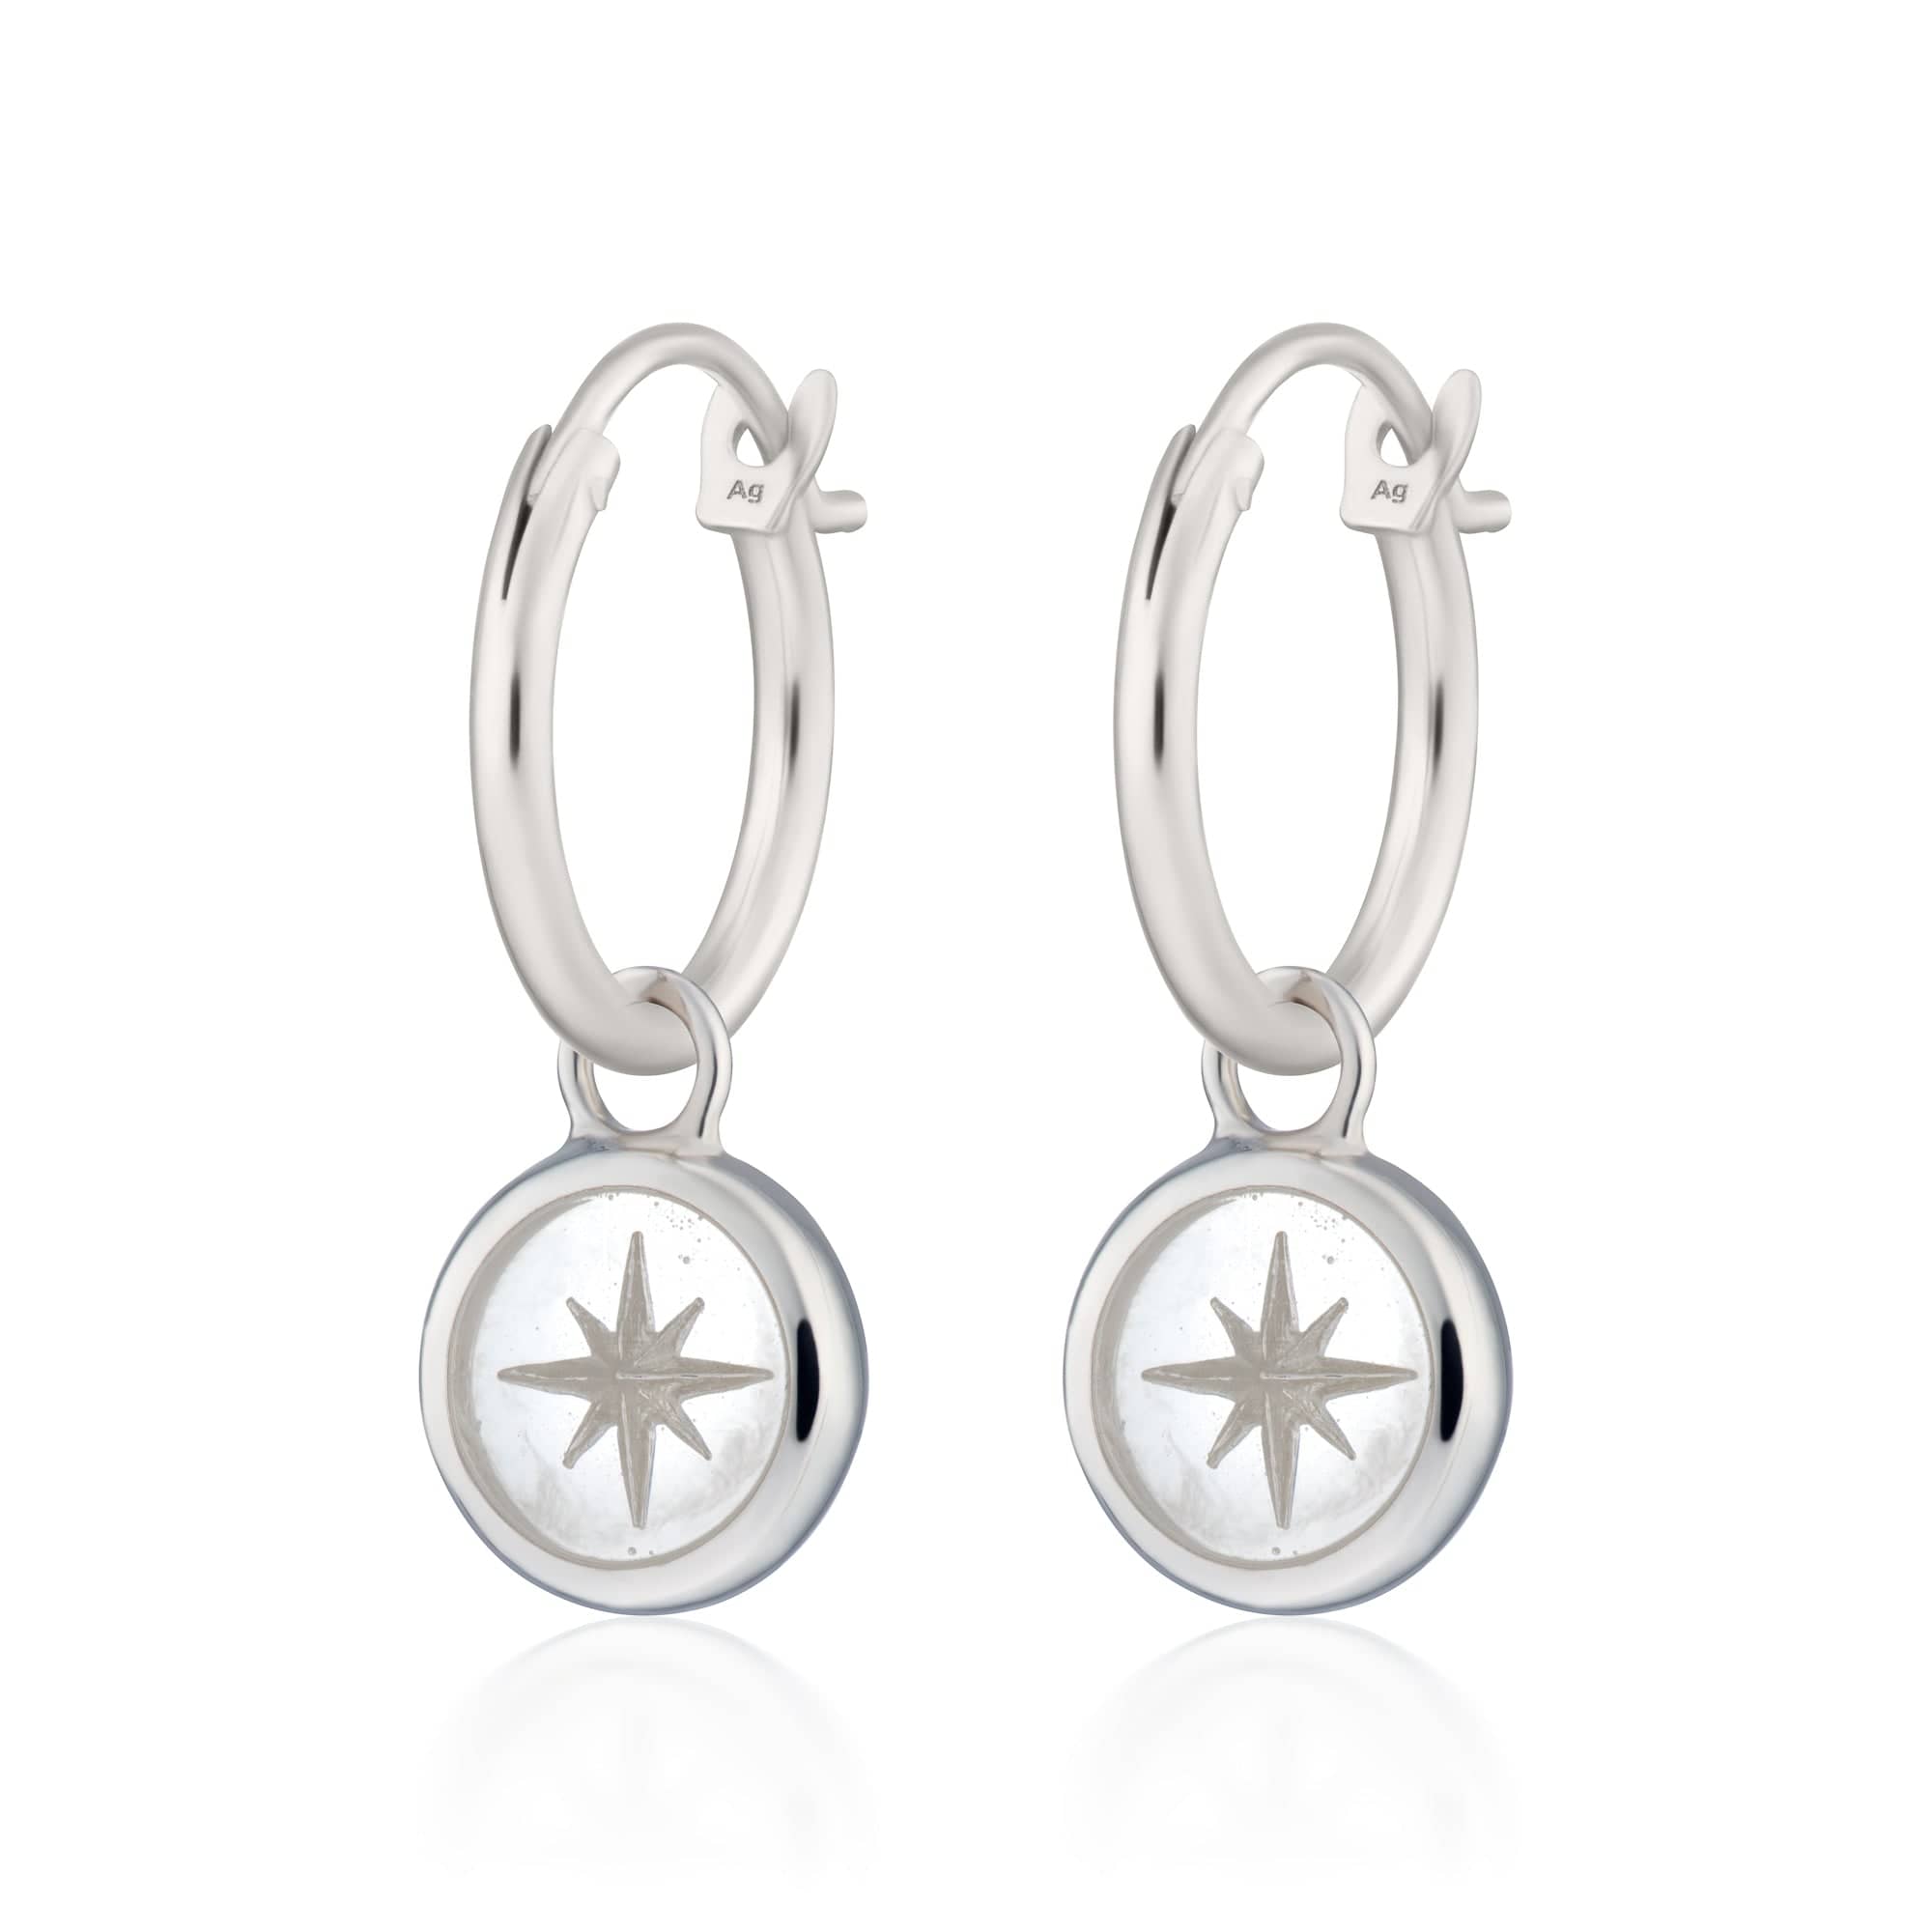 Lily Charmed Silver White Star Resin Charm Earrings